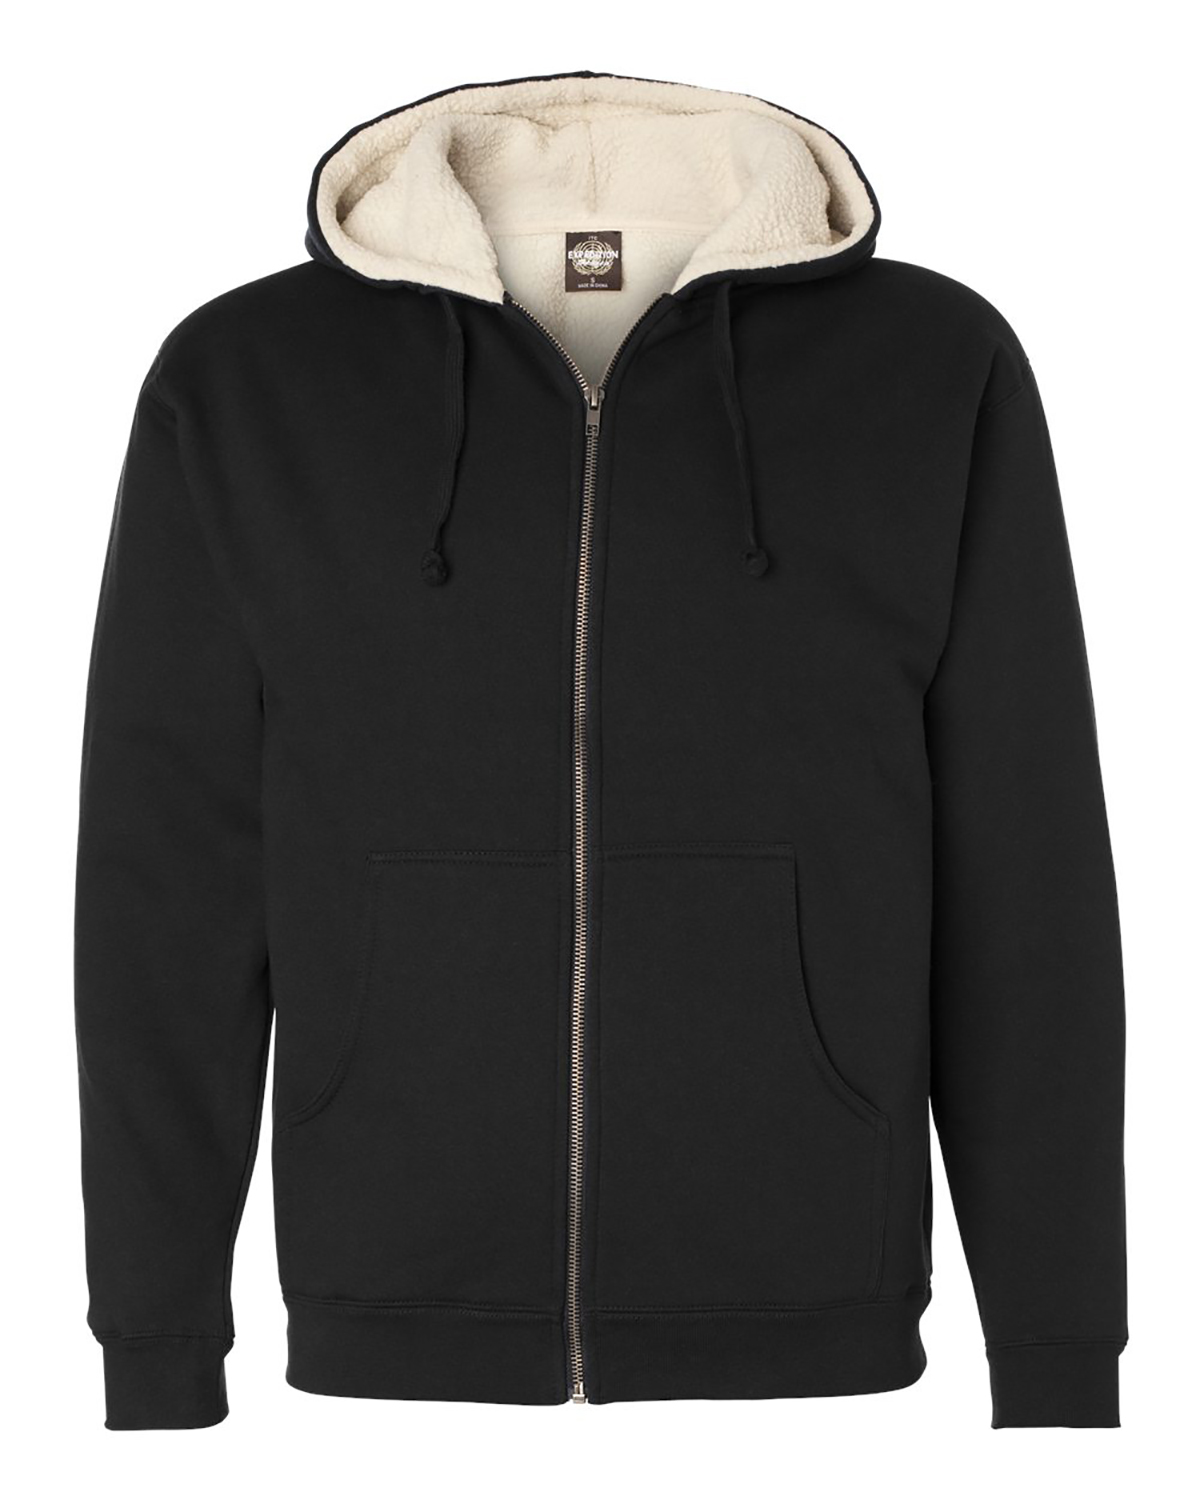 'Independent Trading Co. EXP40SHZ Men Sherpa Lined FullZip Hooded'